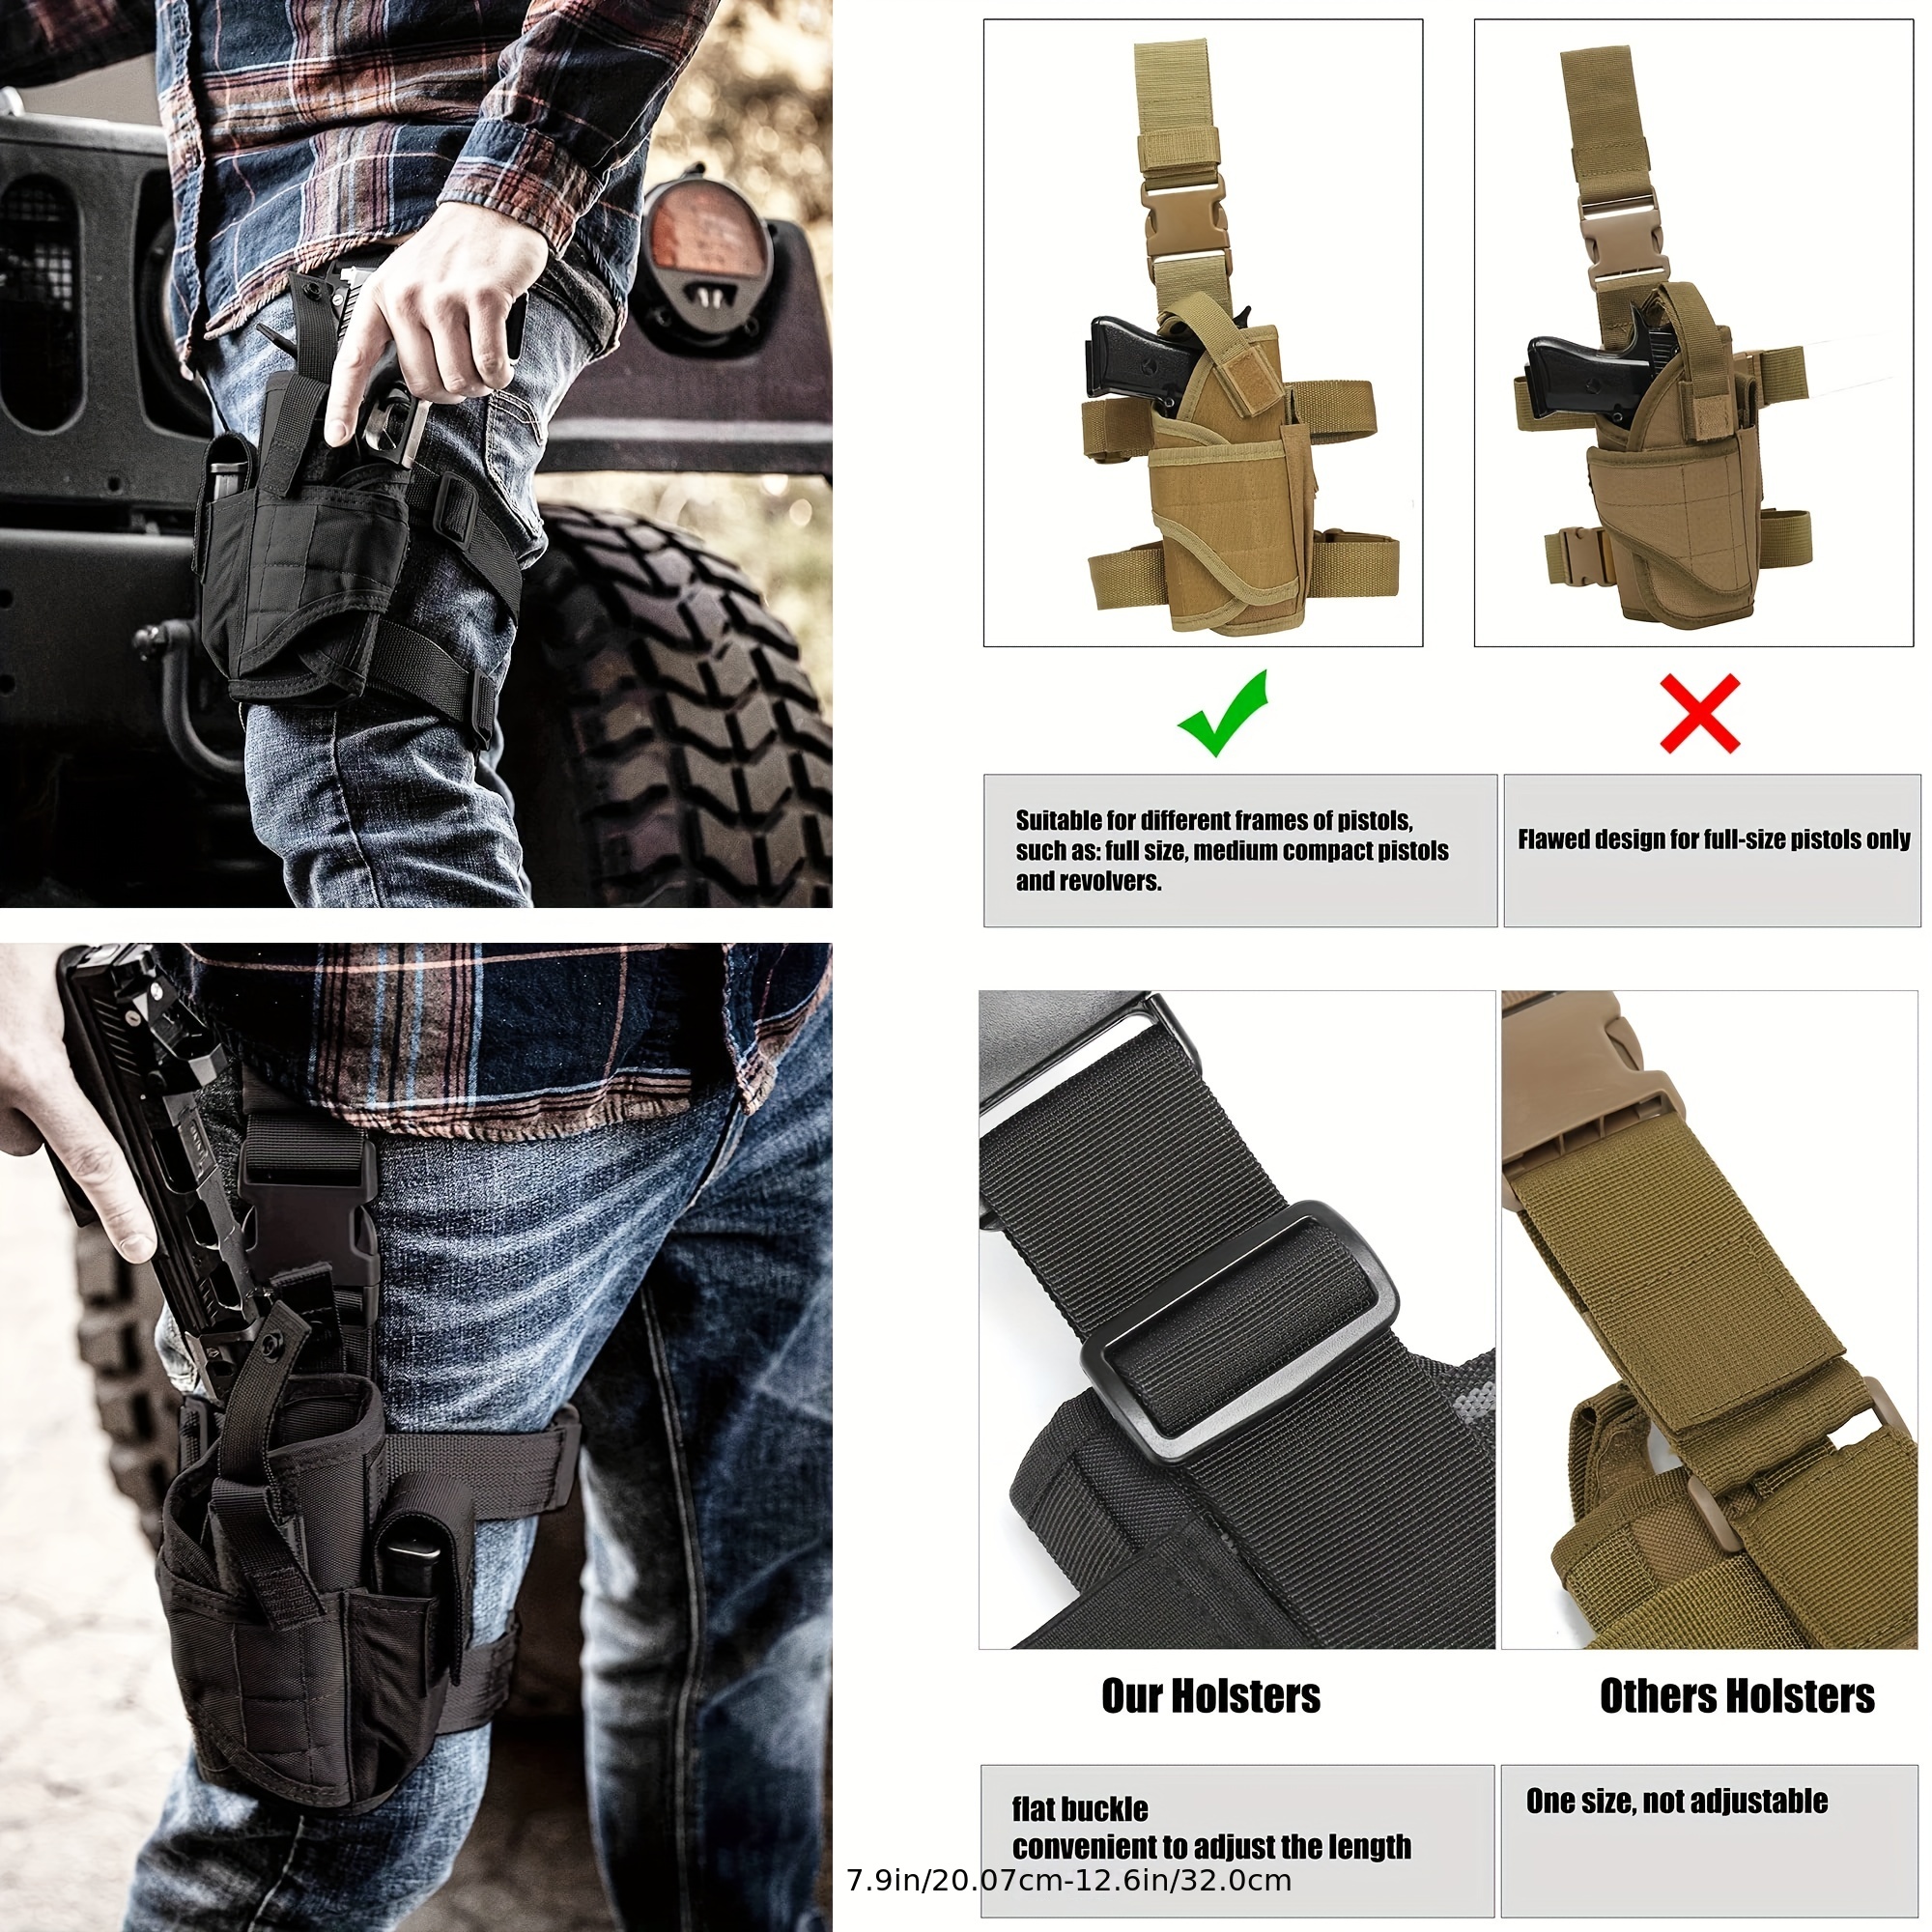 TACTICAL DROP LEG THIGH HOLSTER WITH MAGAZINE CARRIER- Choose Your